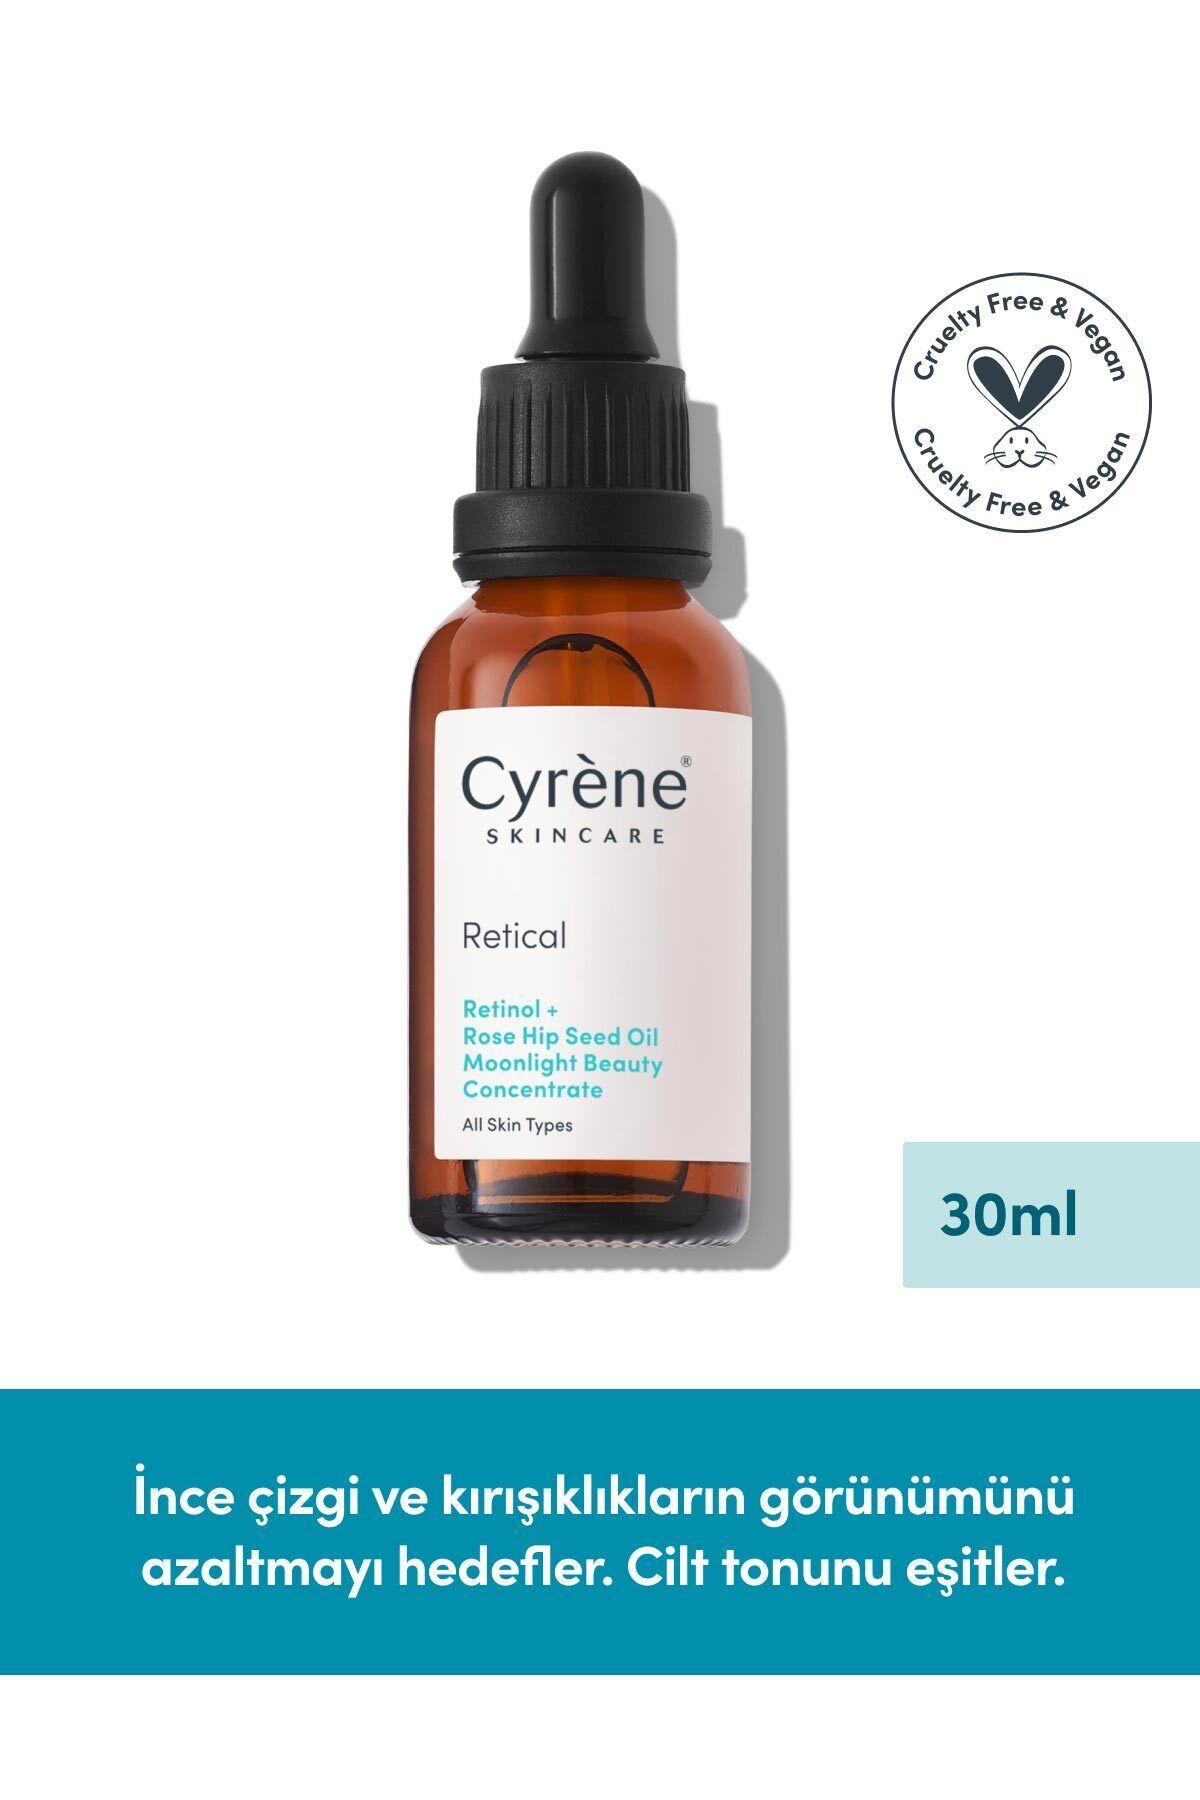 Cyrene Retinol Rose Hip Seed Oil Moonlight Beauty Concentrate